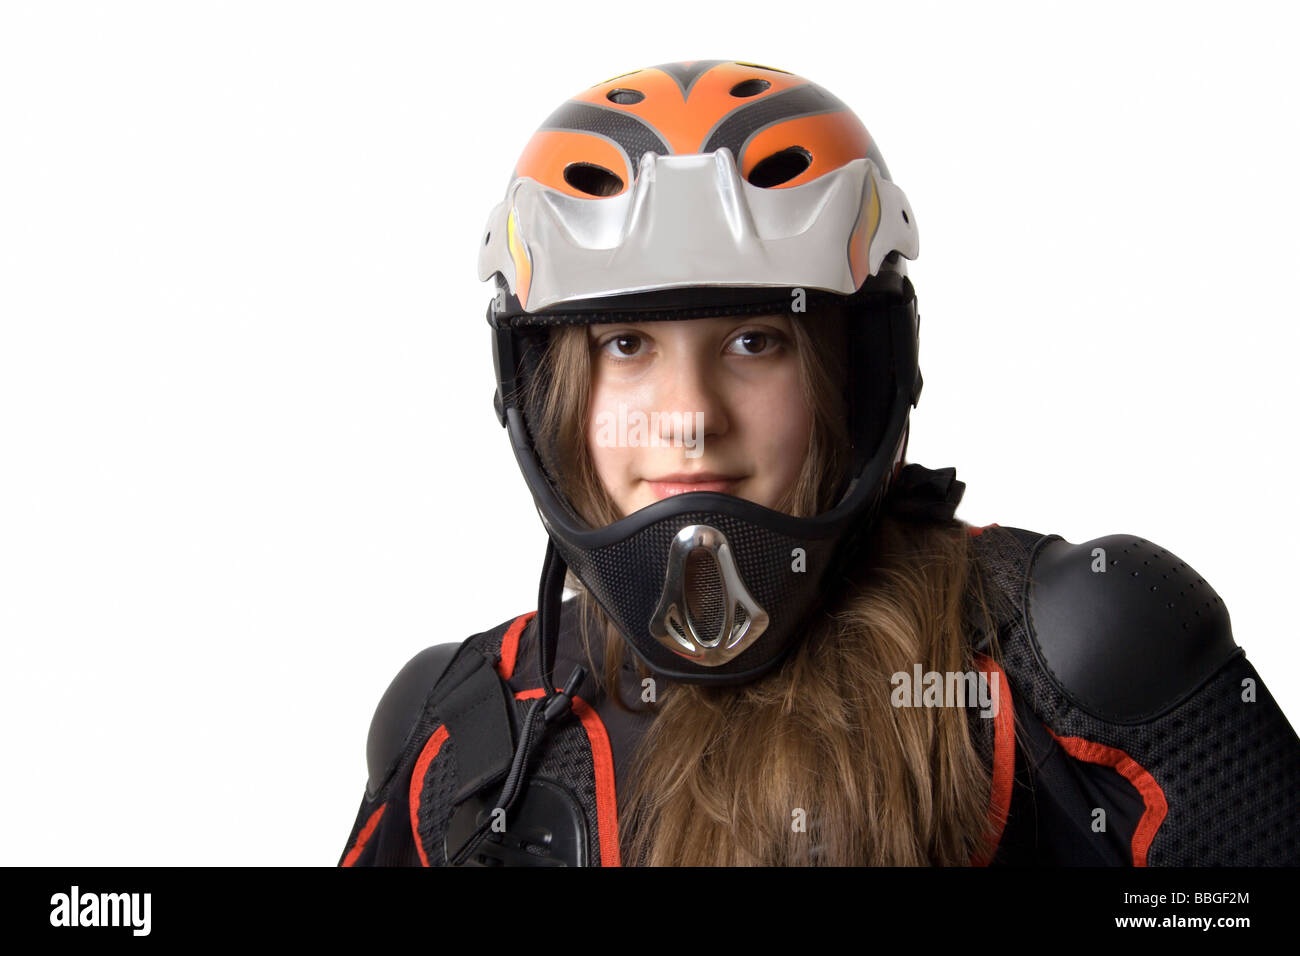 Extream girl in body armour with full face helmet isolate Stock Photo